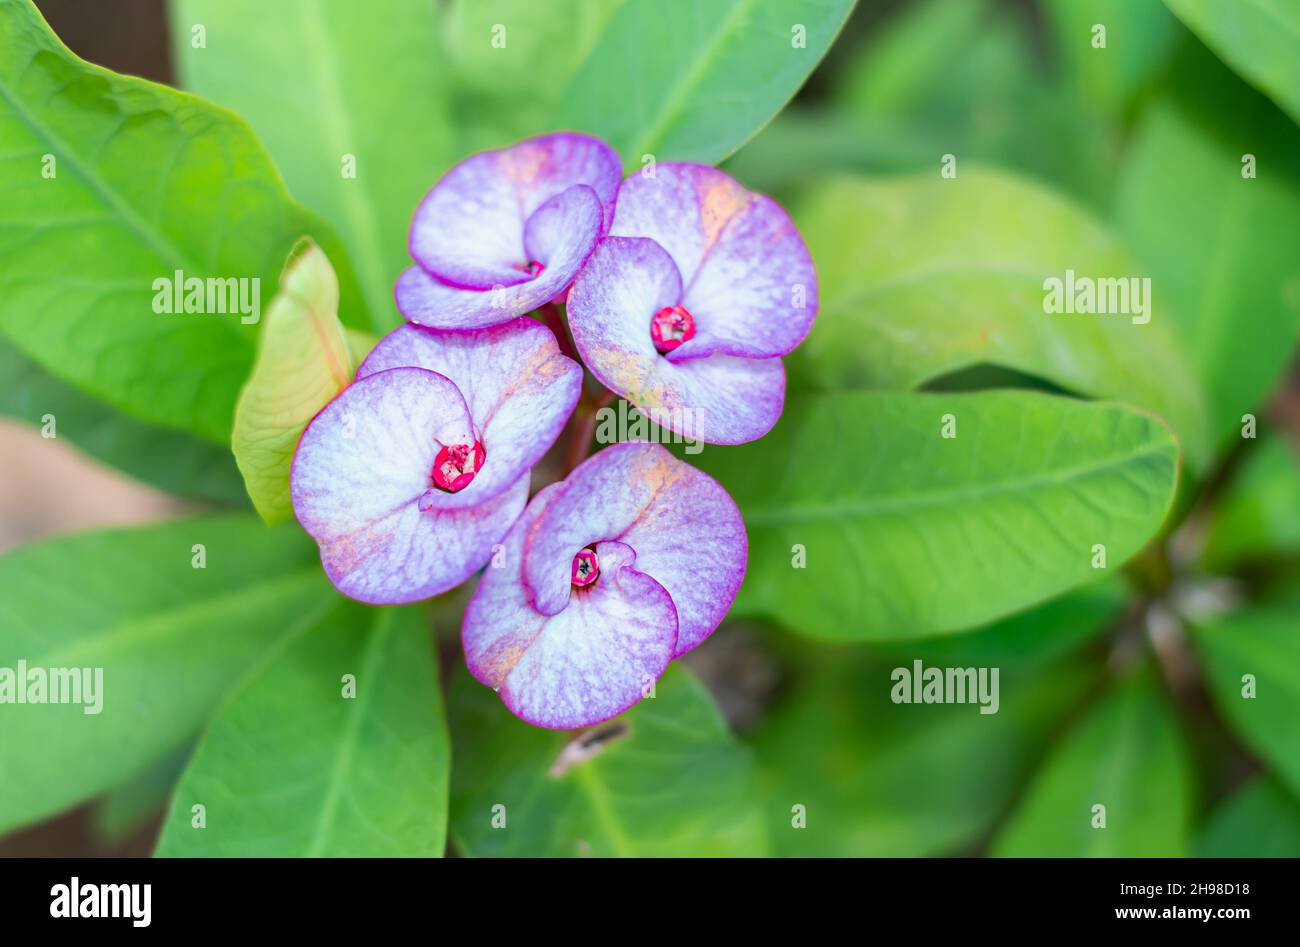 A blue/purple colored Crown of Thorns, Euphorbia milii, flowers with leaves Stock Photo